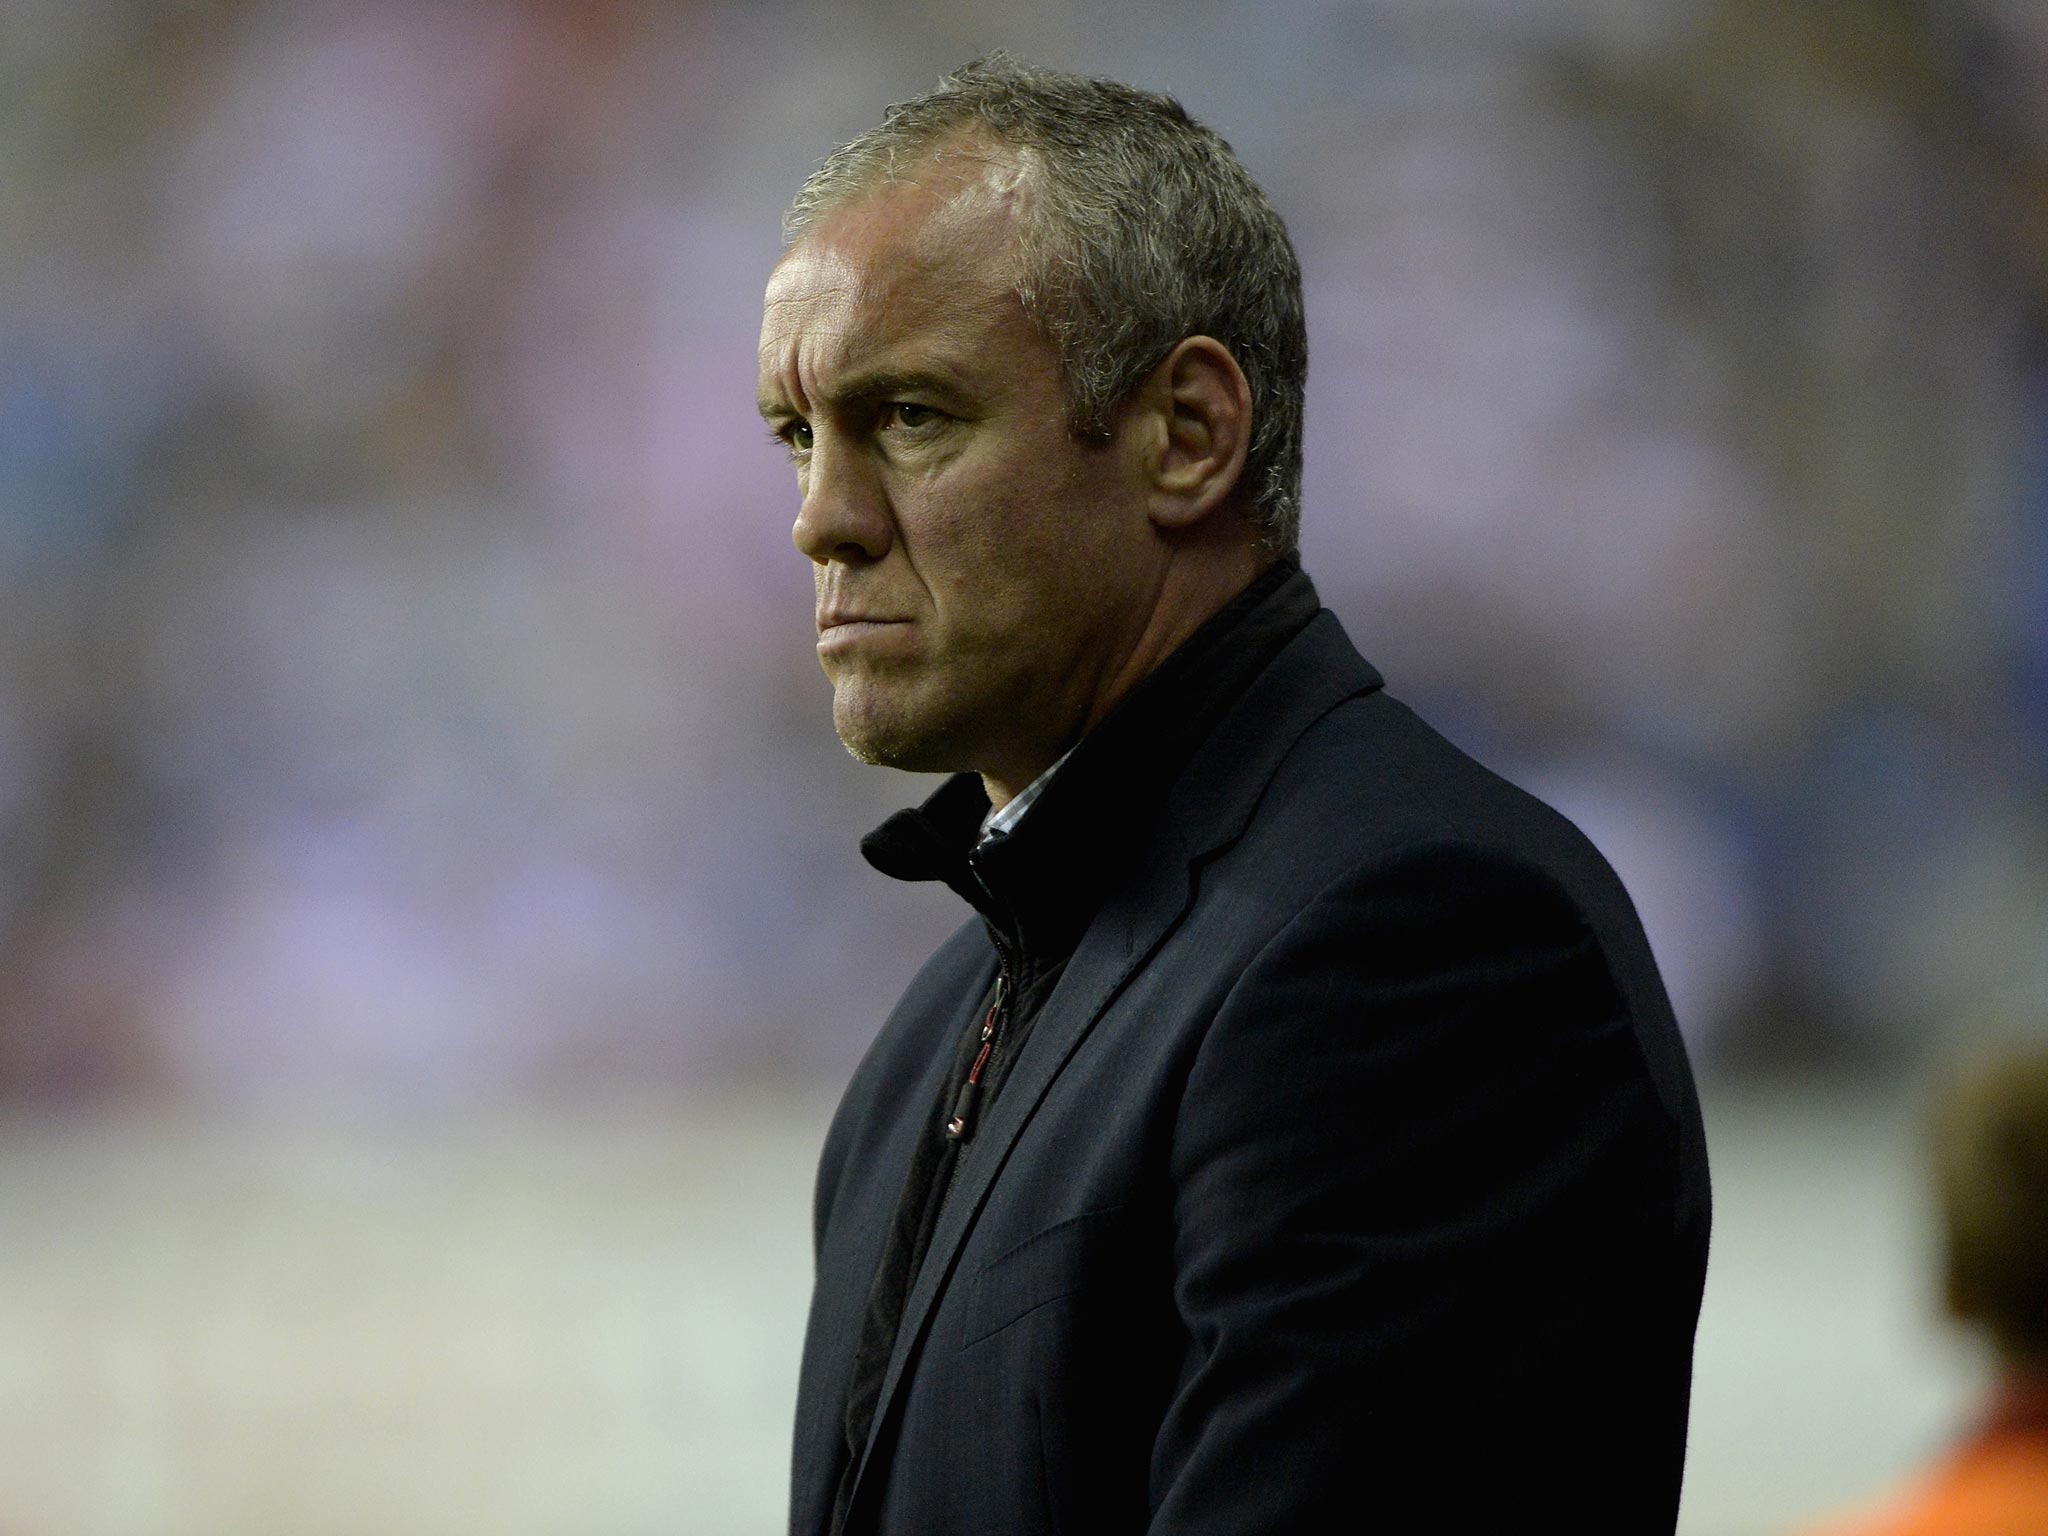 Brian McDermott believes his former club Bradford Bulls can get back to their past glory days with the right changes